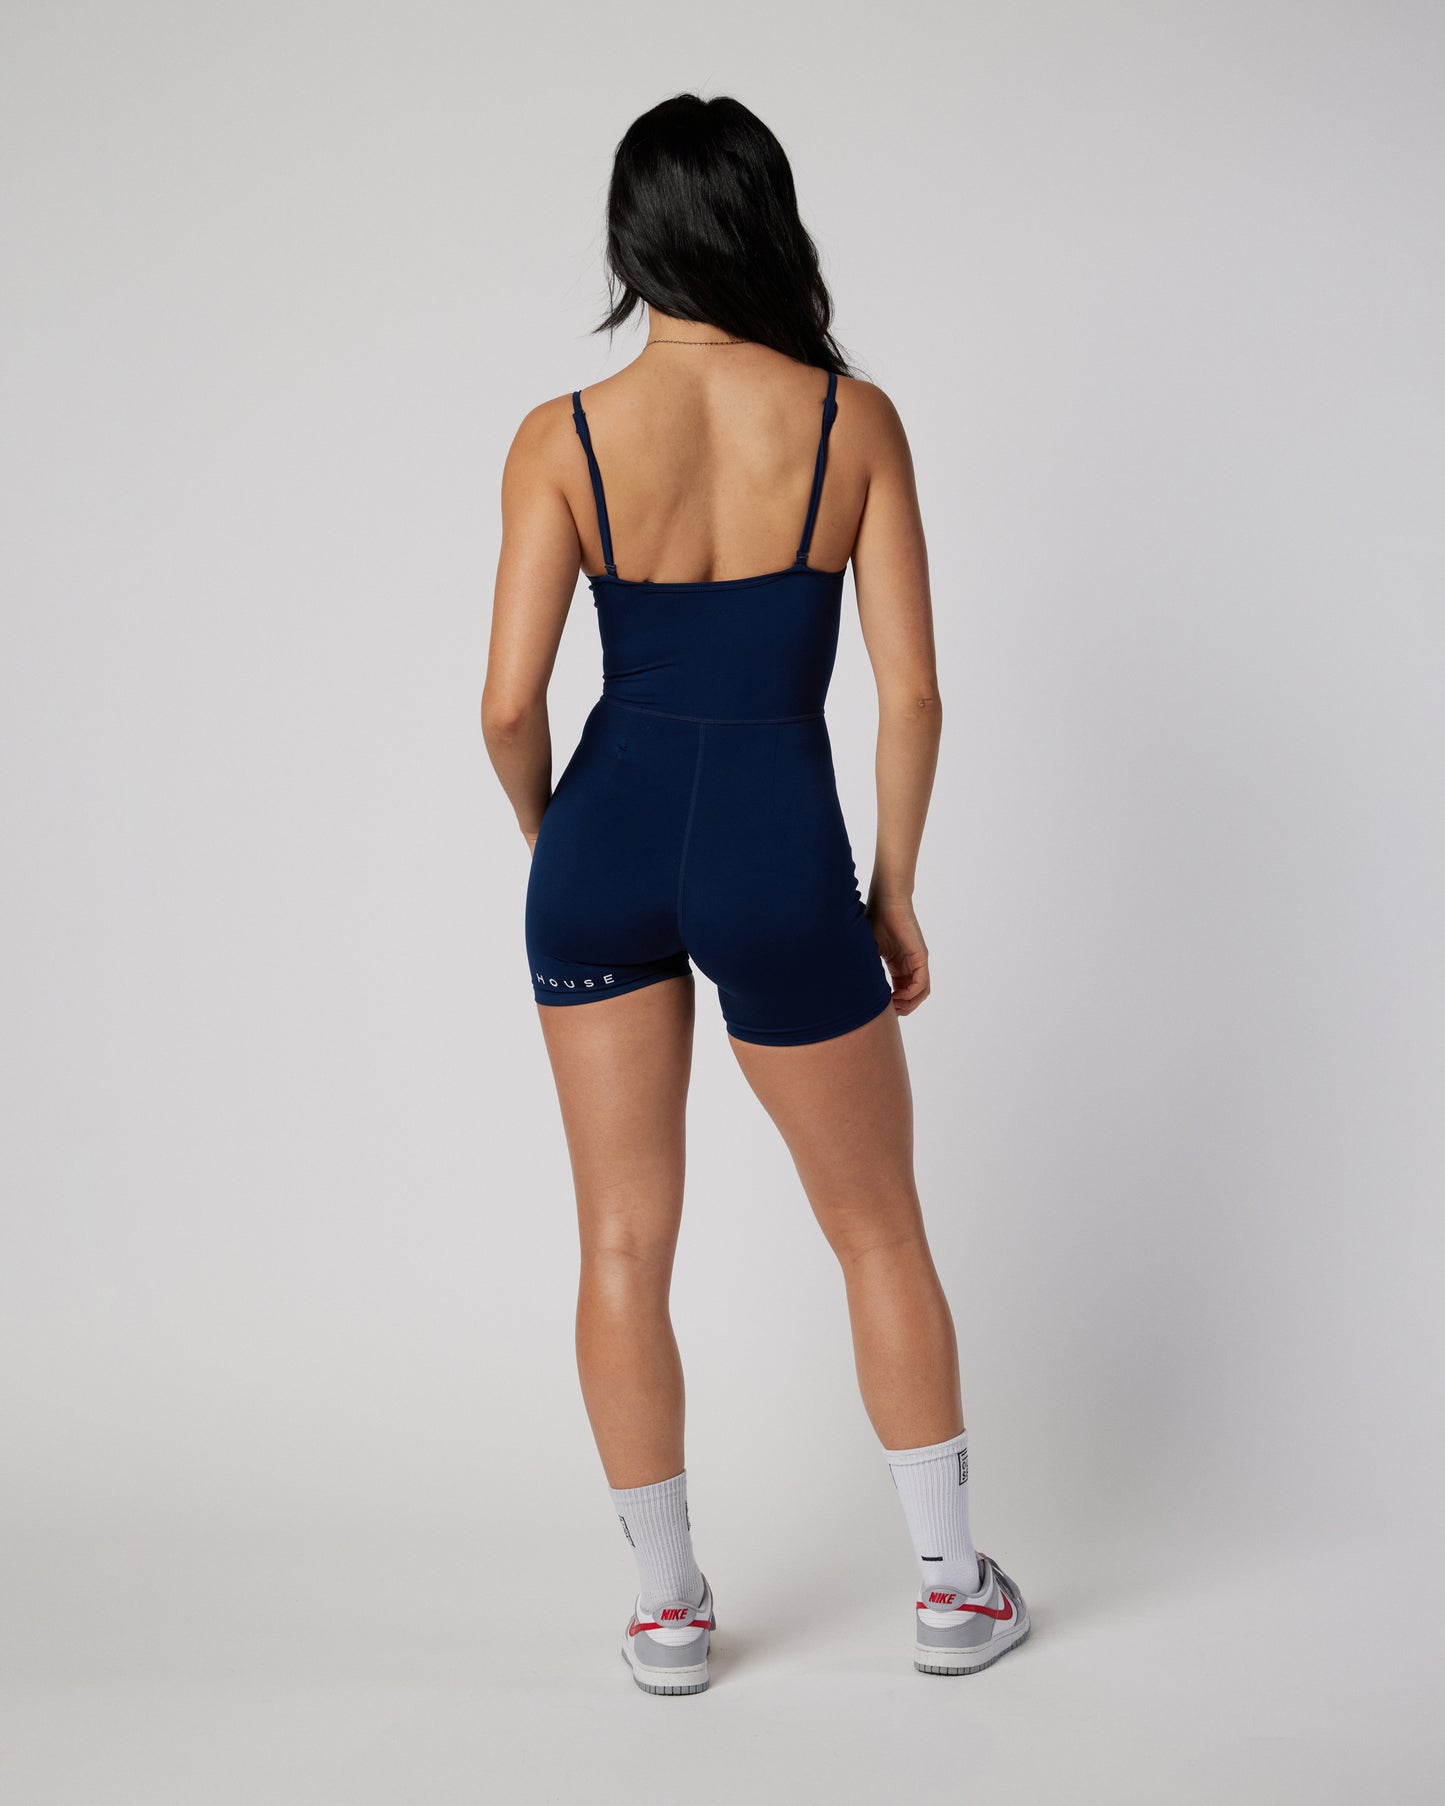 Womens sports one piece in navy